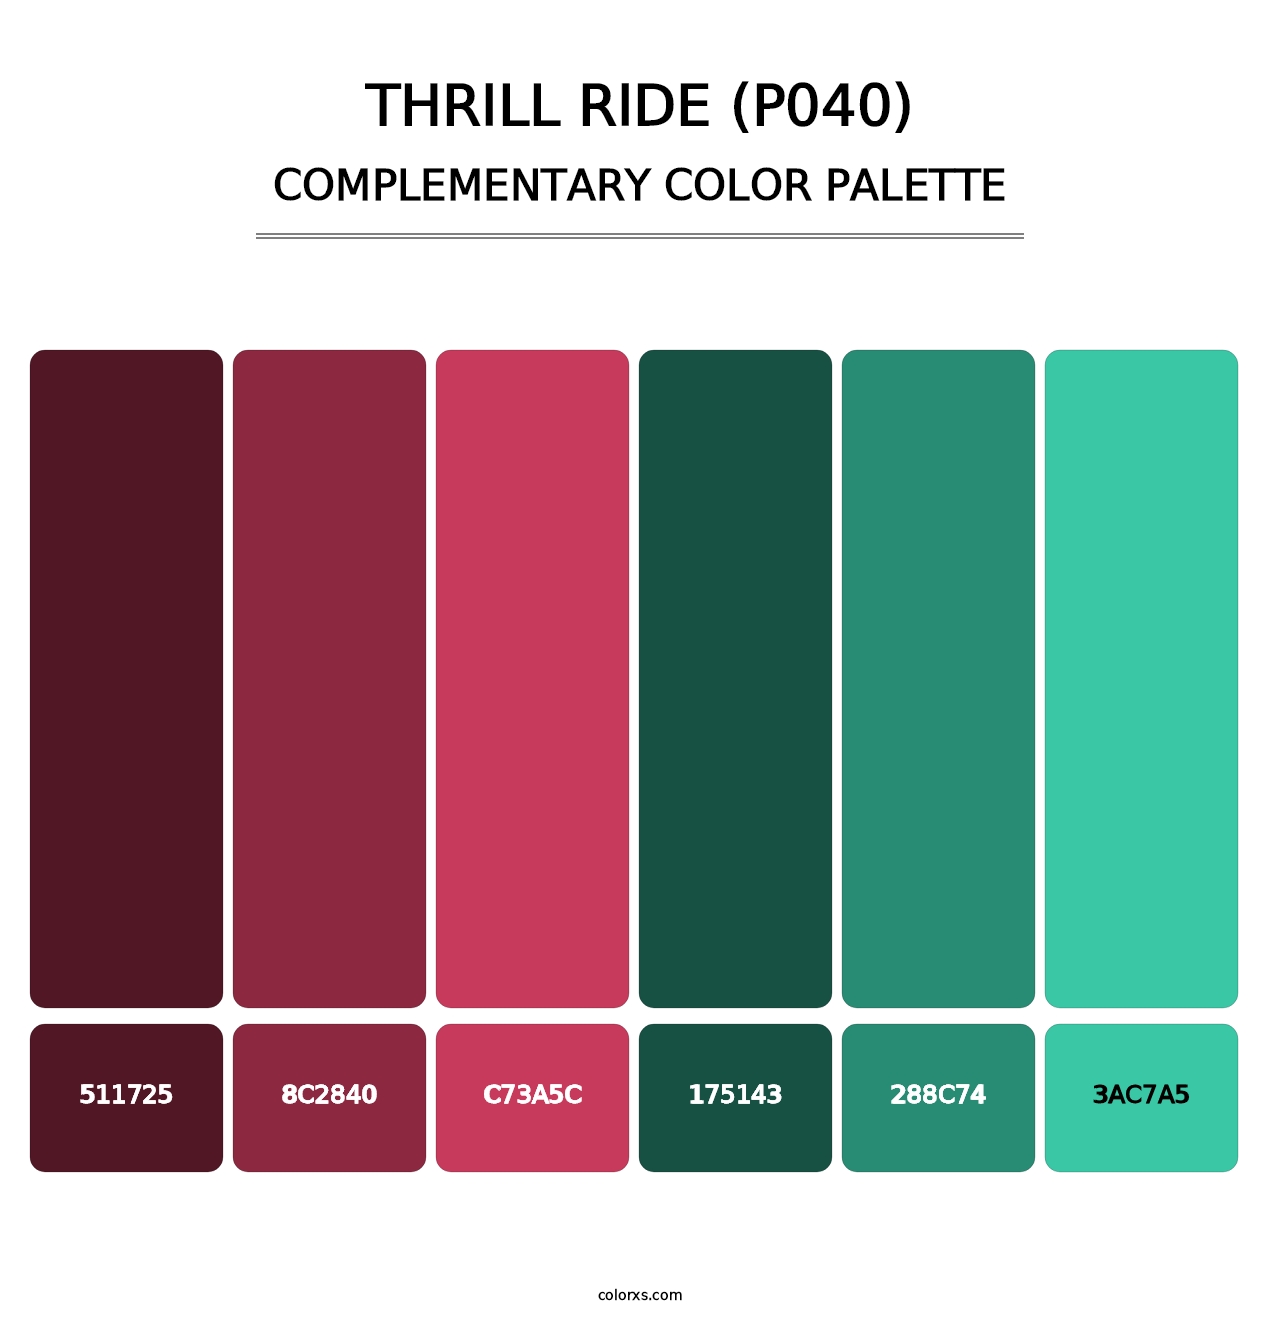 Thrill Ride (P040) - Complementary Color Palette